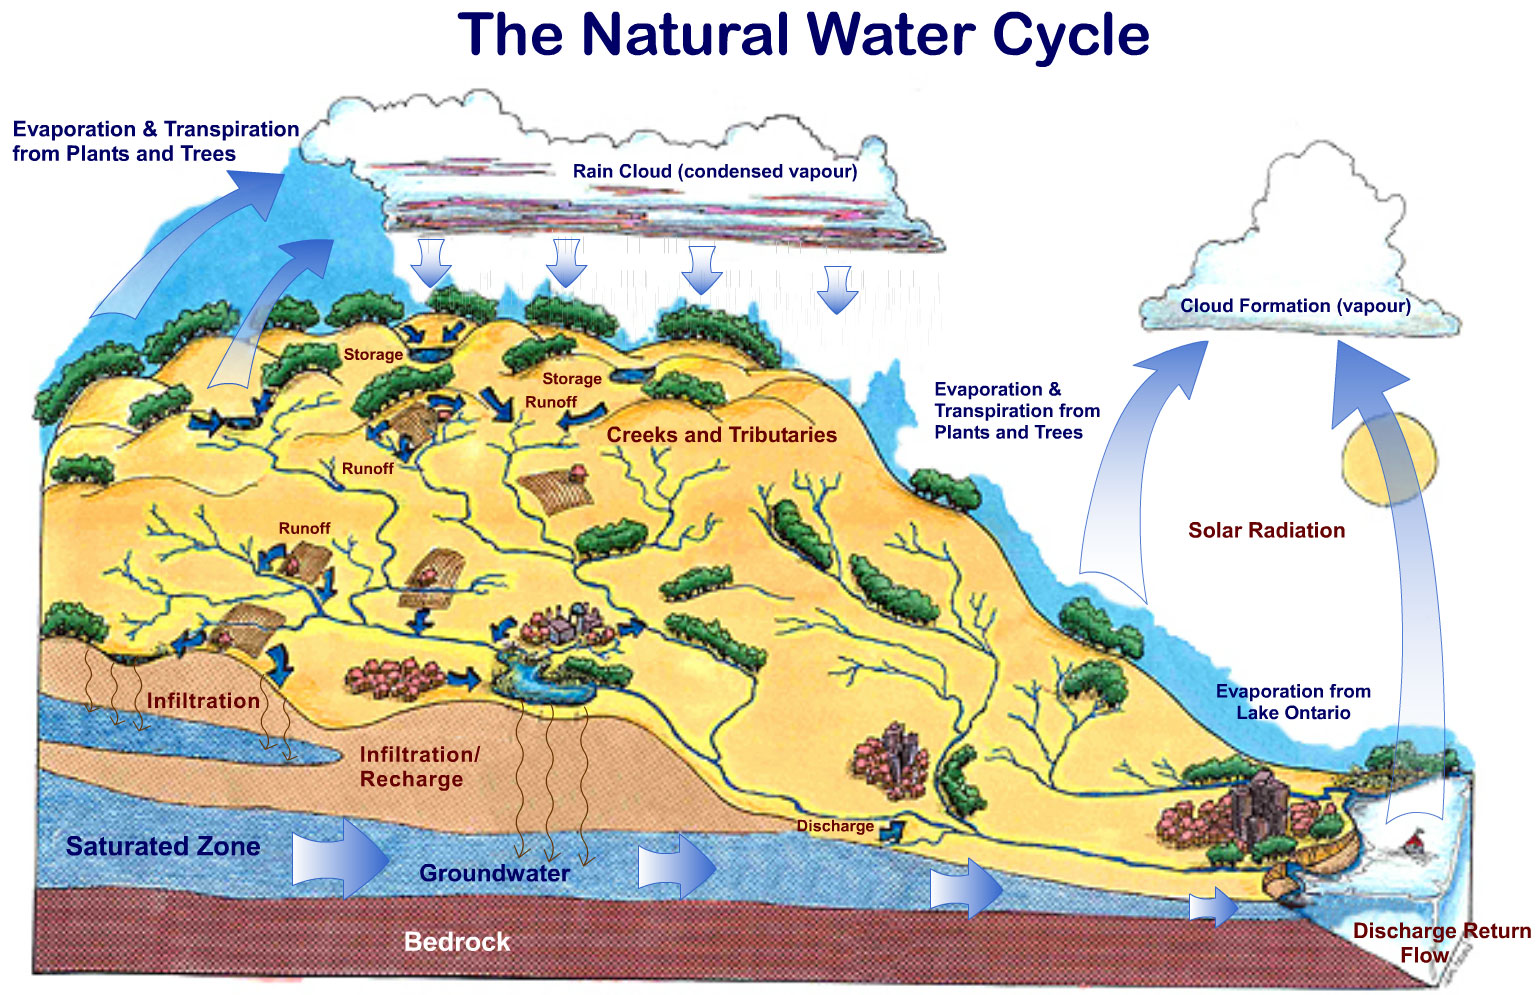 The Natural Water Cycle